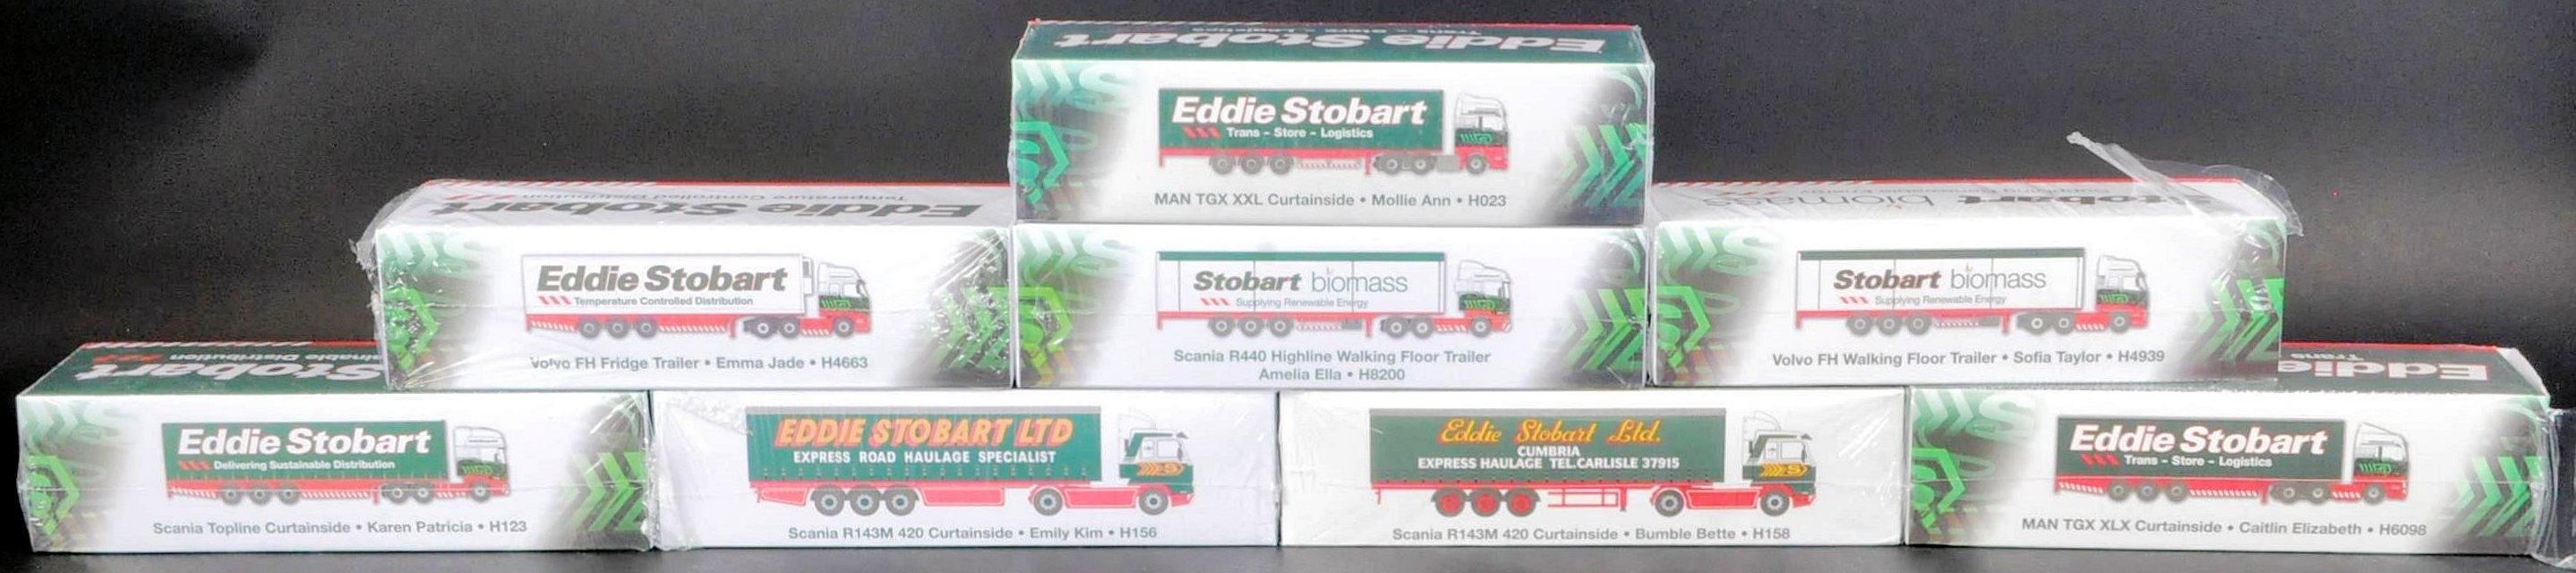 COLLECTION OF ATLAS EDITIONS EDDIE STOBART DIECAST MODELS